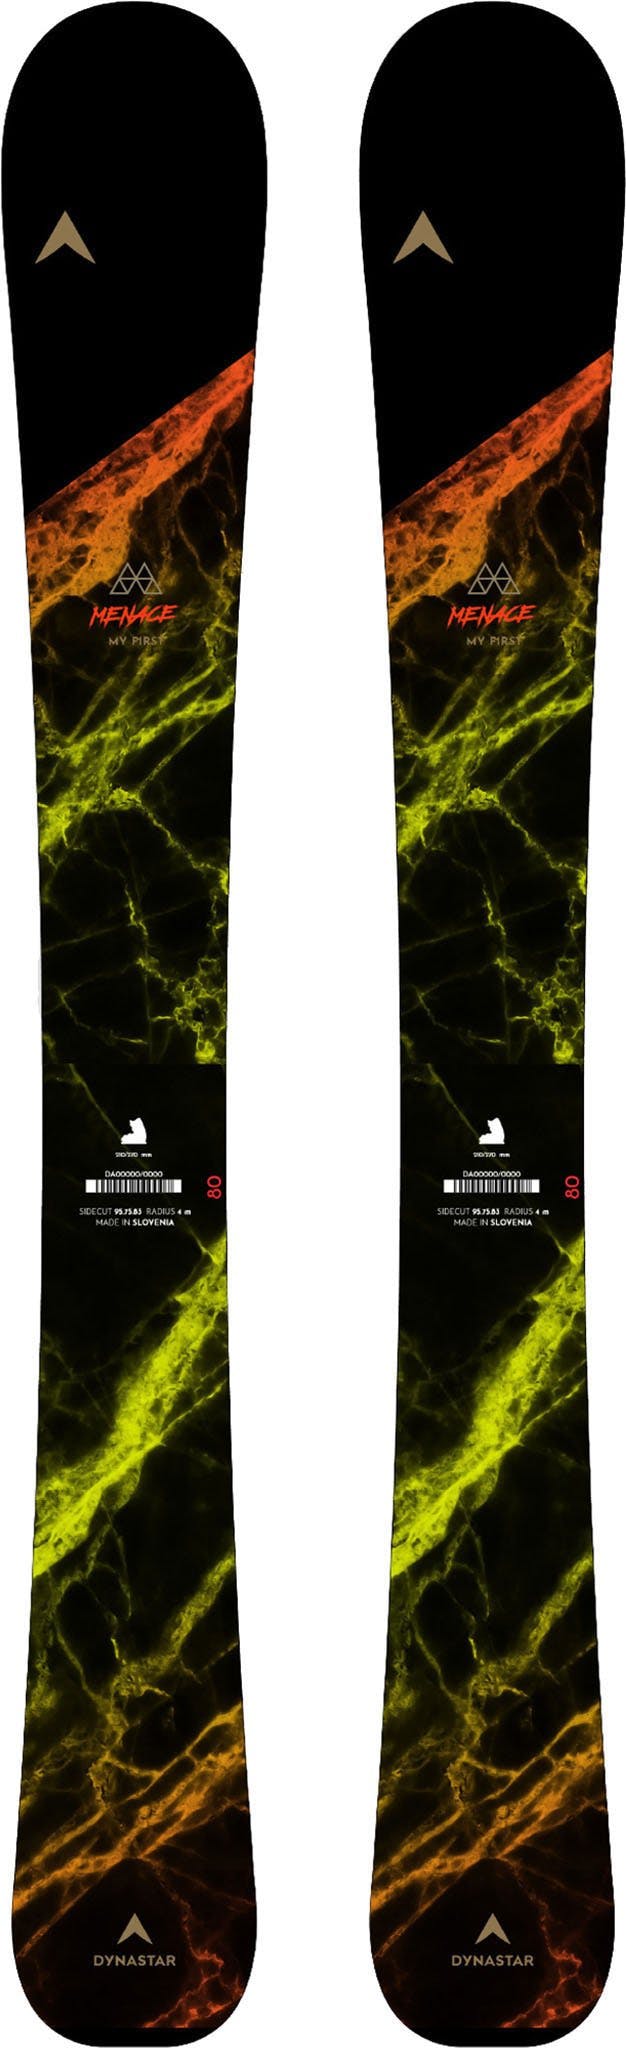 Product image for M-Menace Team Team4 Ski - Youth